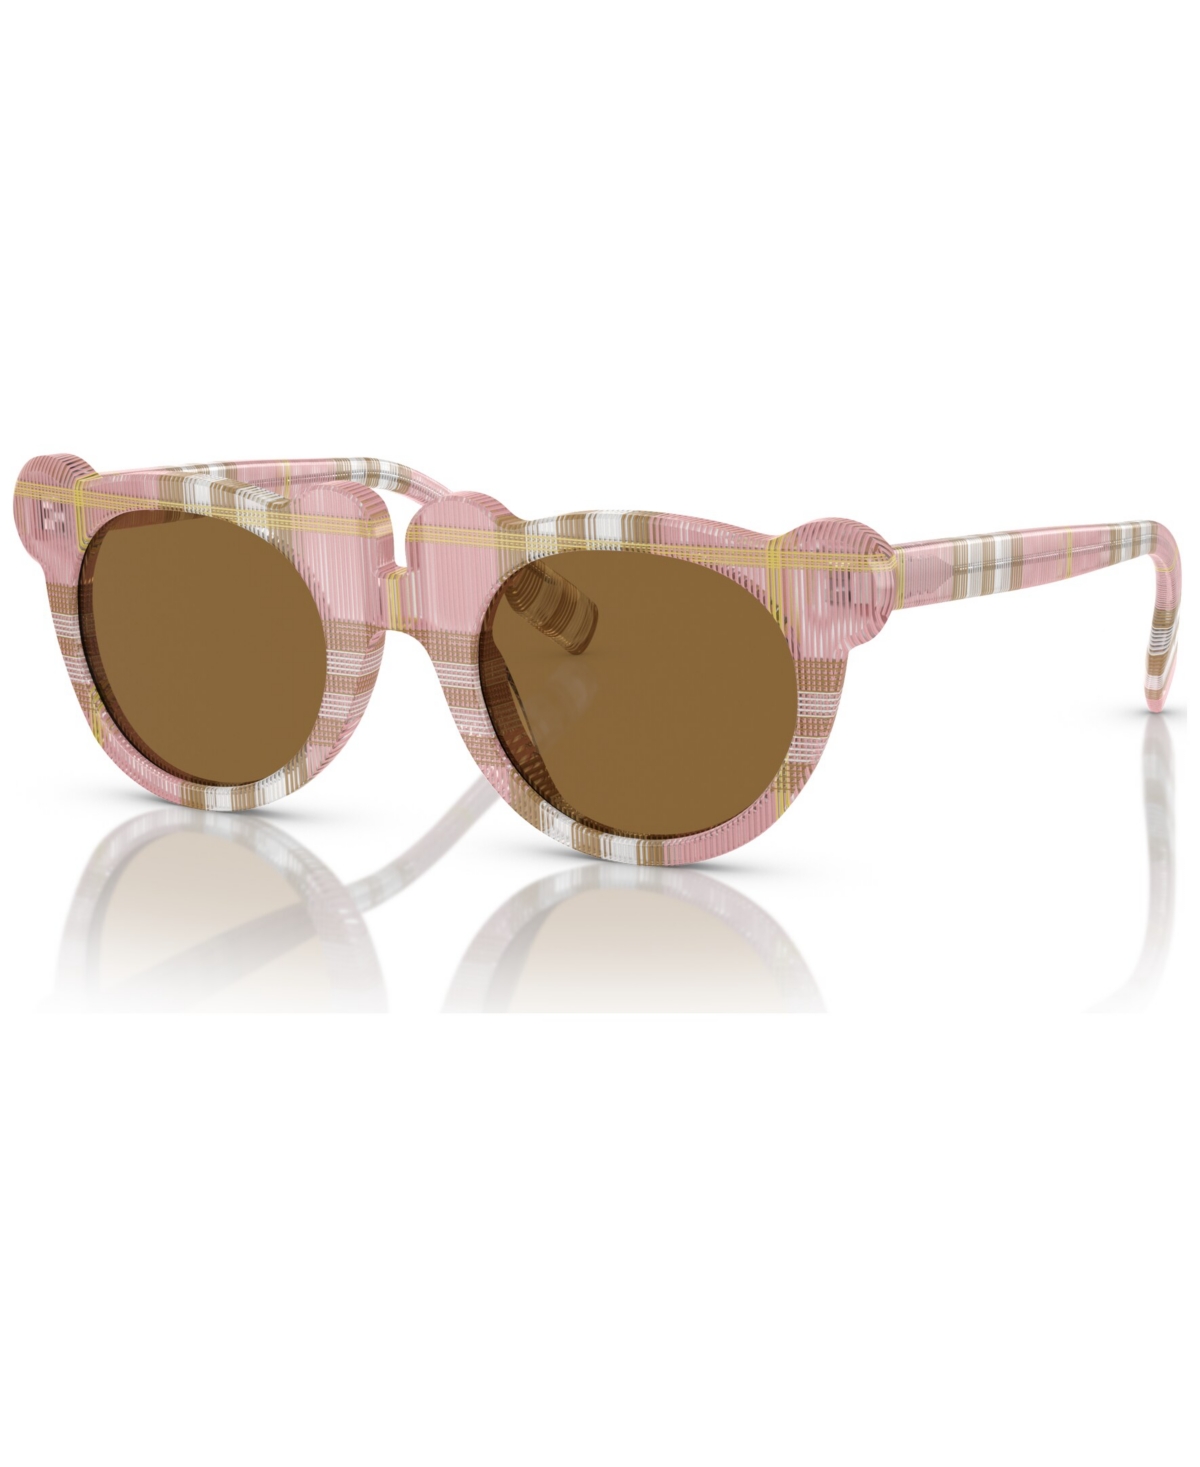 Burberry Sunglasses Jb4355 In Check Pink